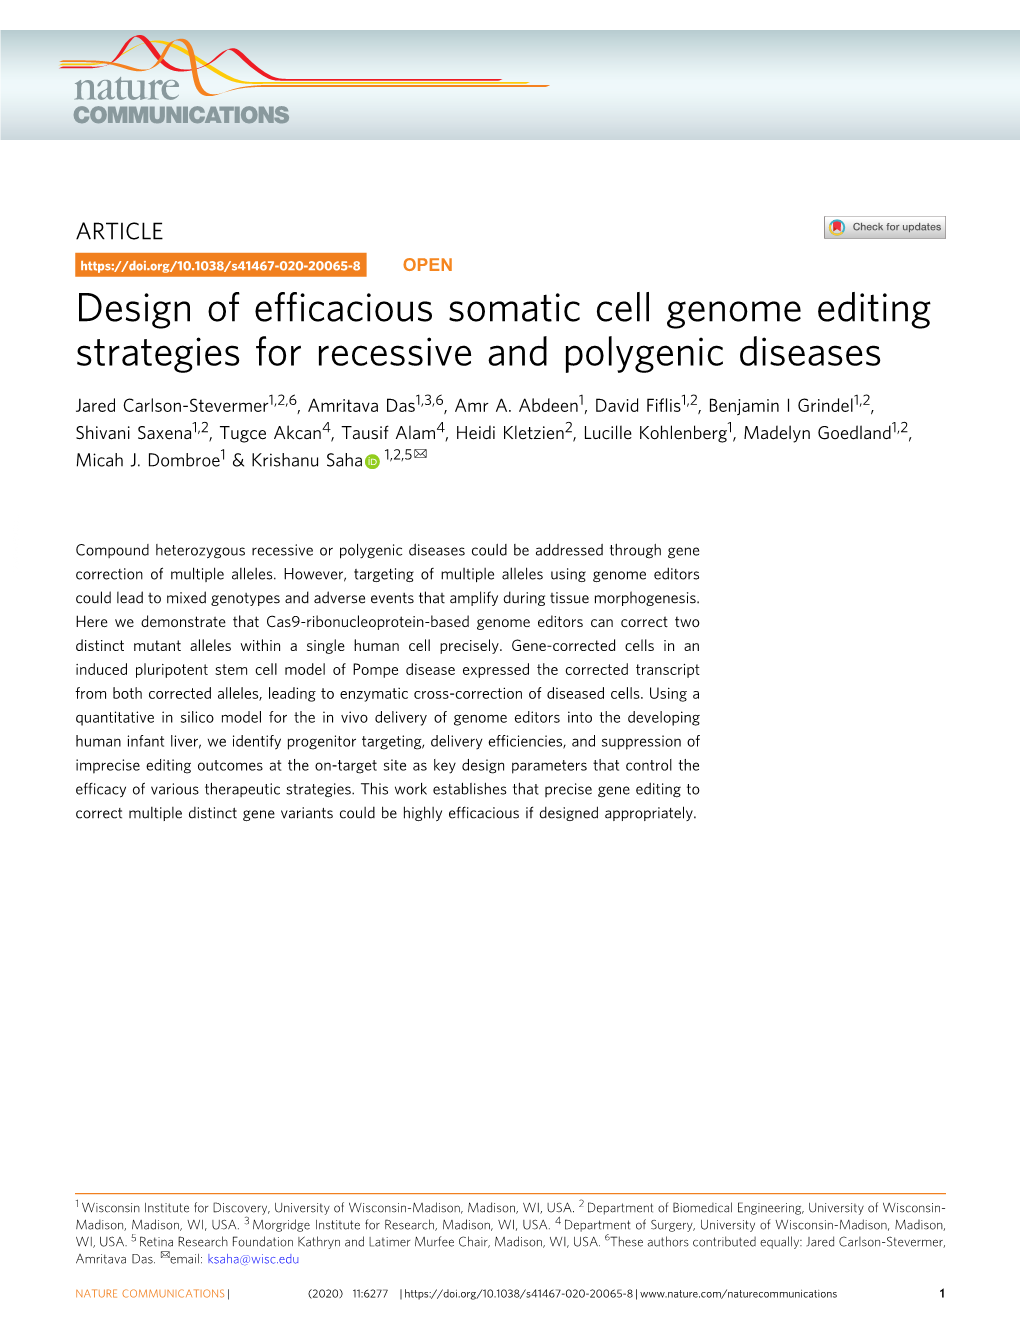 Design of Efficacious Somatic Cell Genome Editing Strategies For